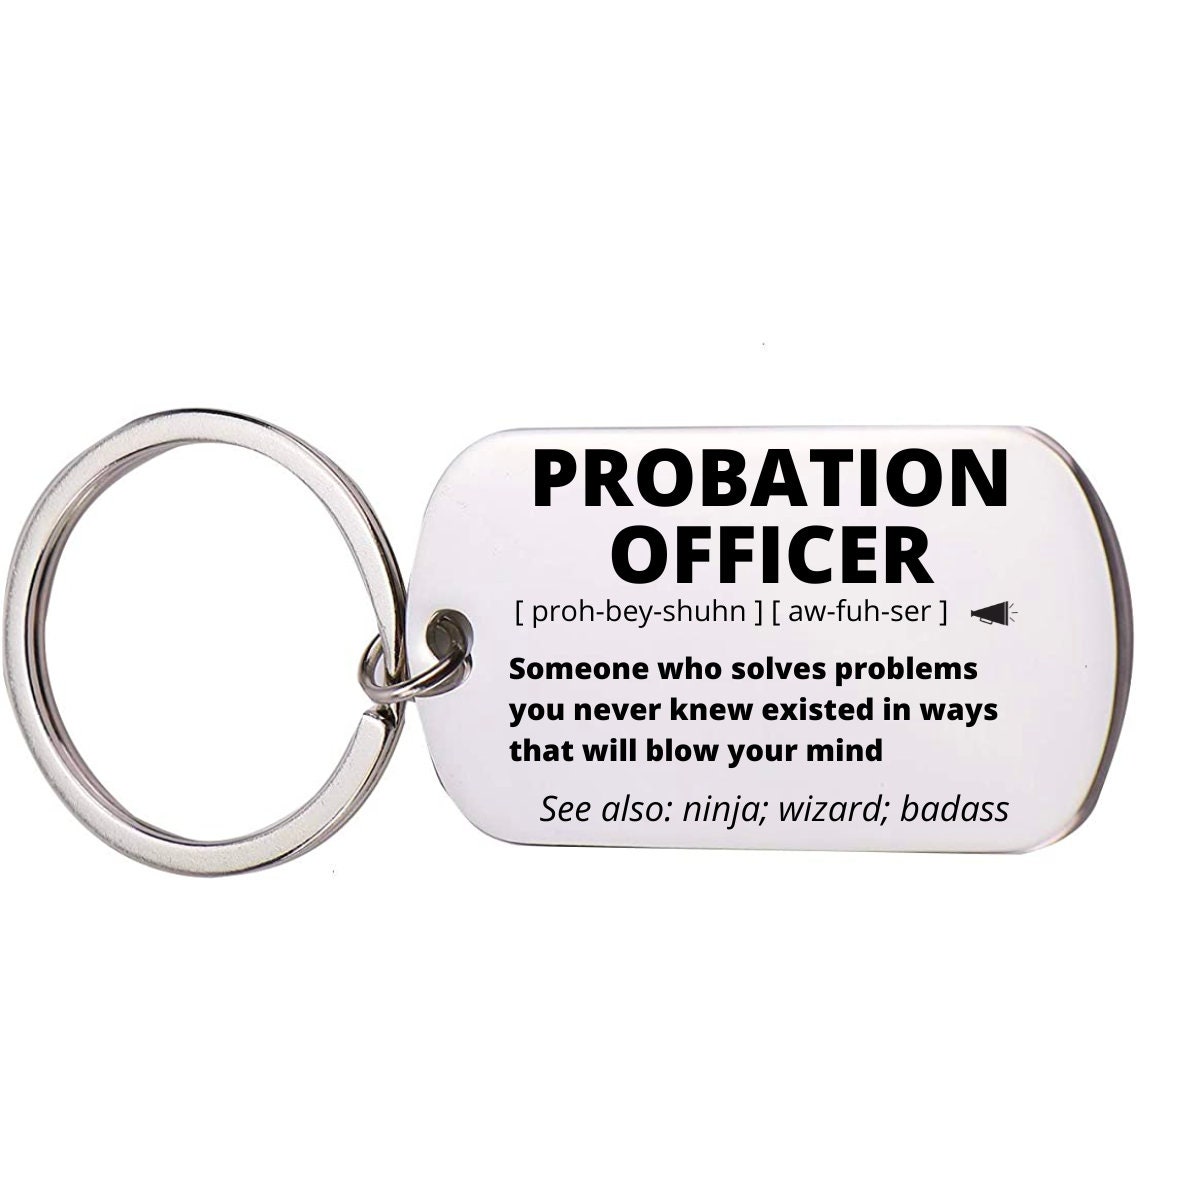 Police Officer Gift Funny Correctional Probation Officer Appreciation or  Birthday Idea Chief Commander, Sergeant Gifts for Men Women 